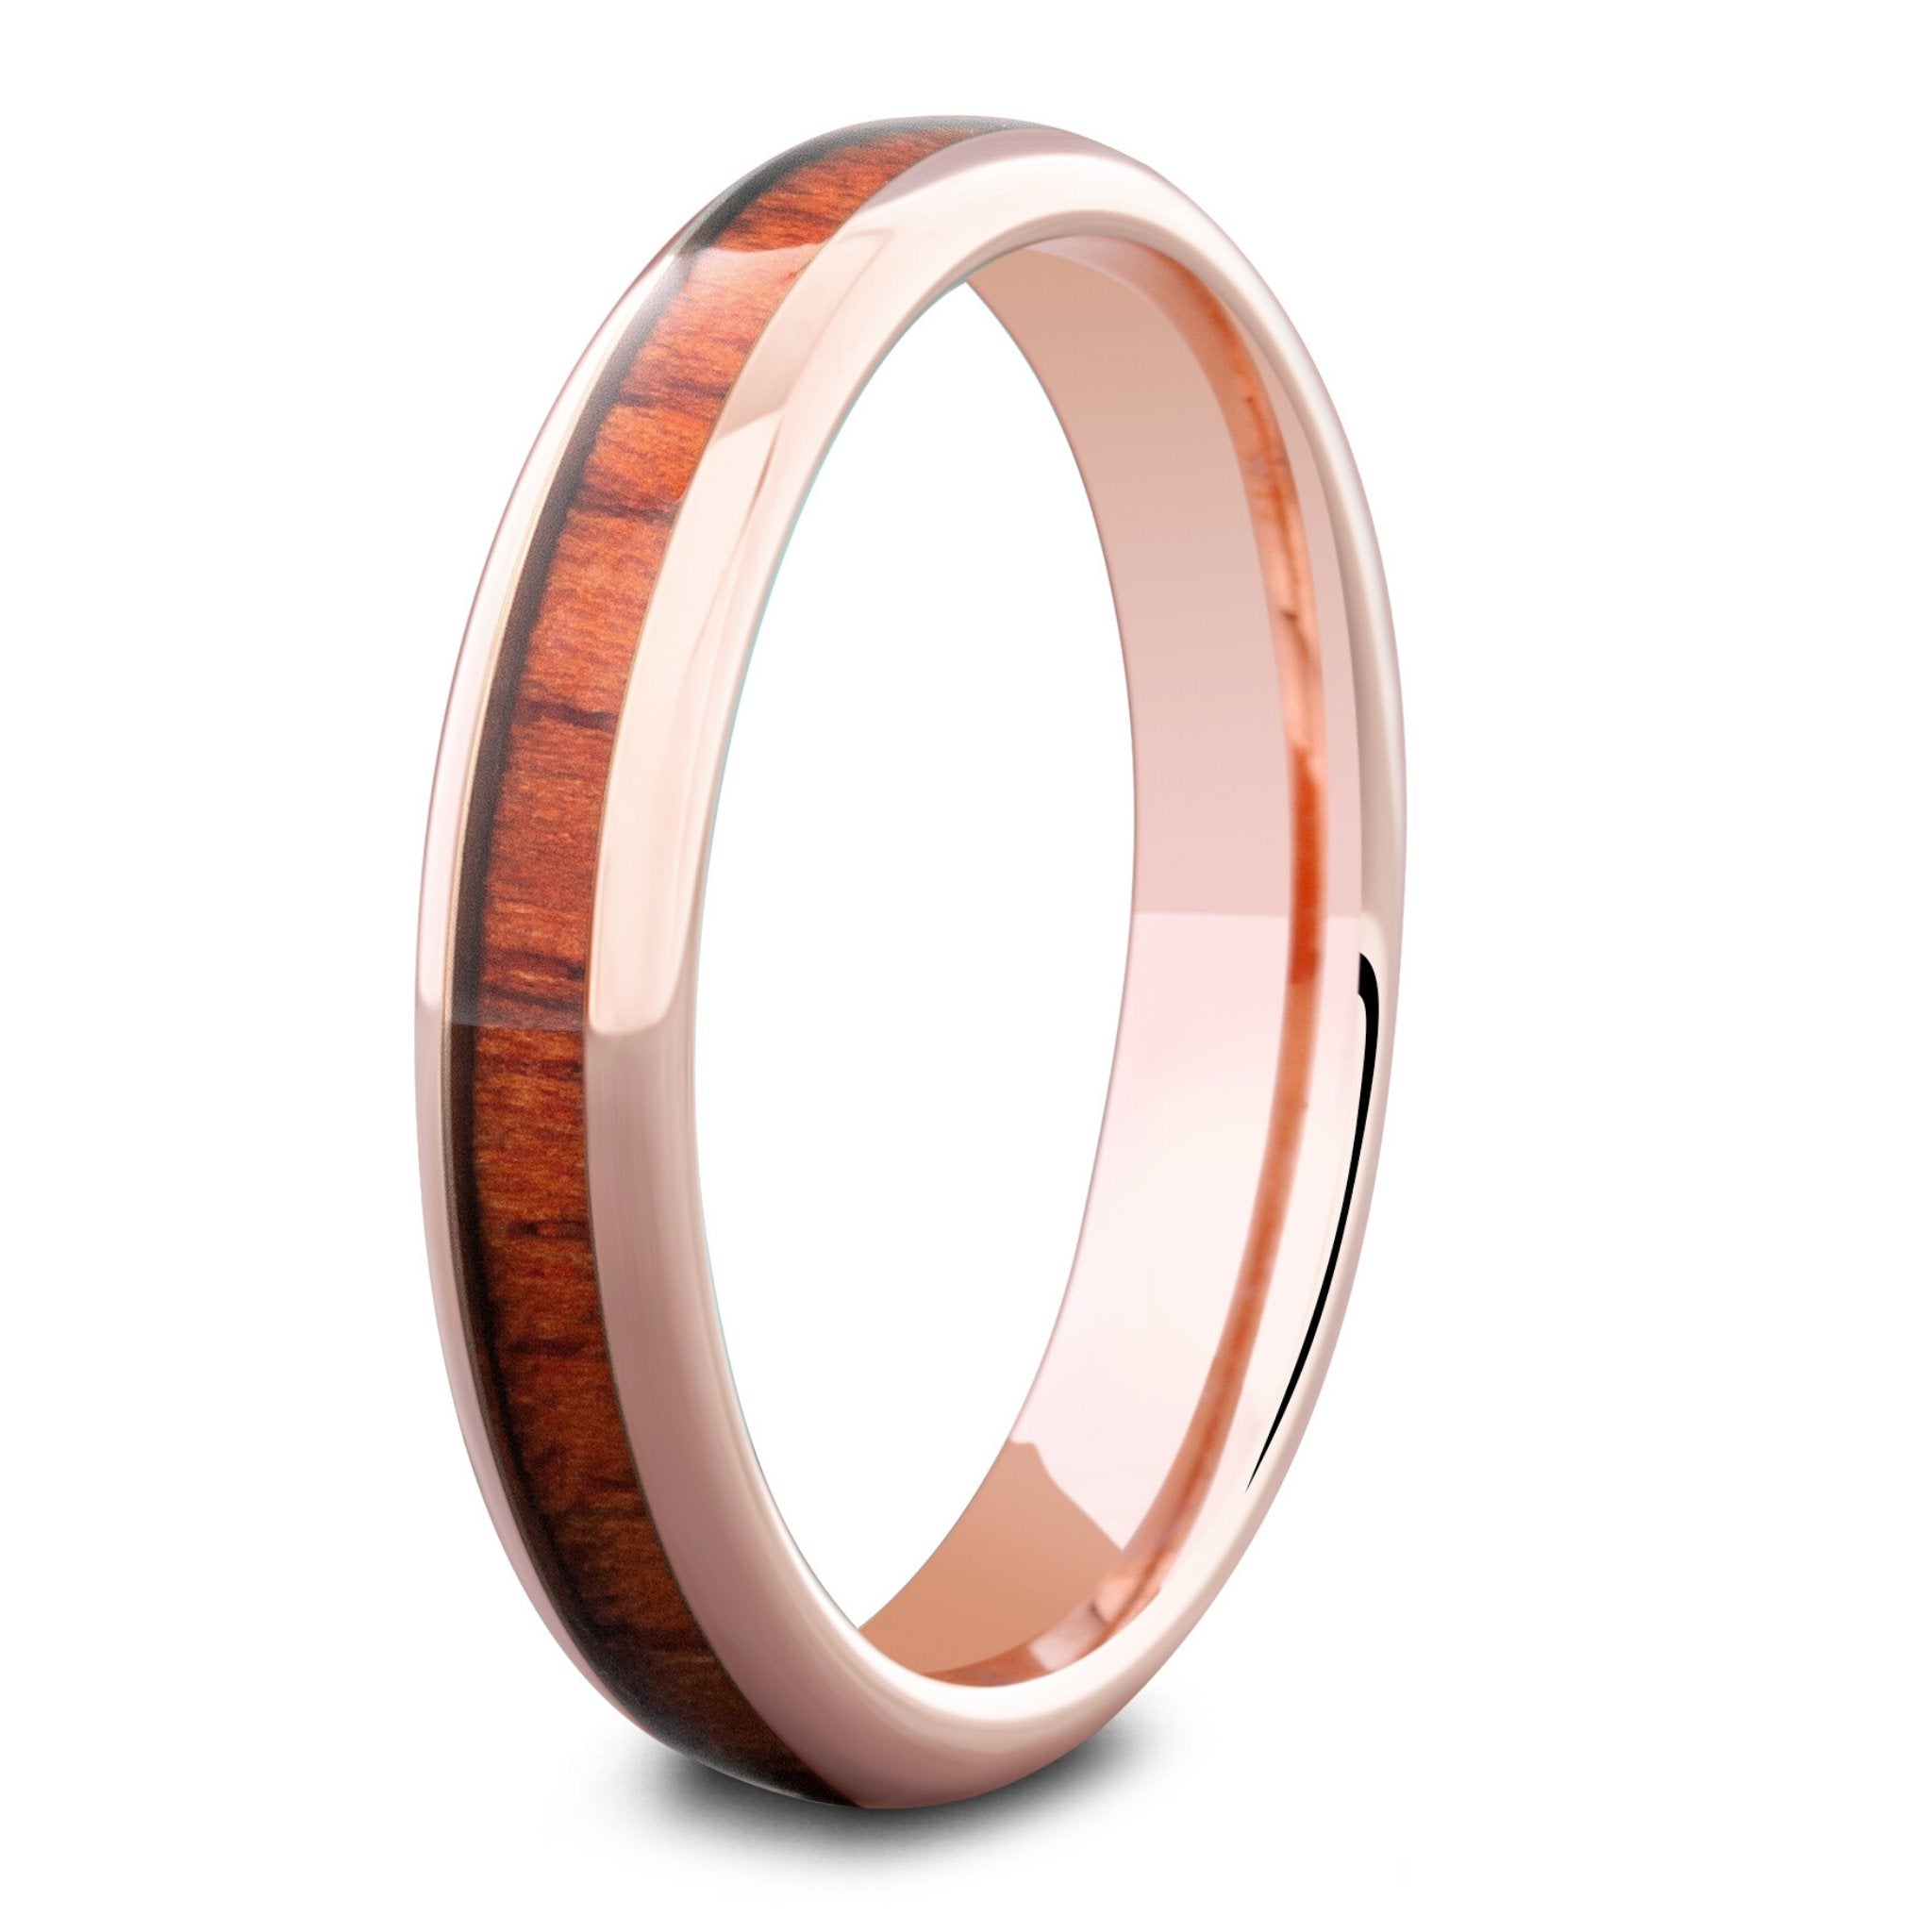 Buy Plezora Ring Wood Resin Ring for Women Male Handmade Wooden Secret  Magic Forest Band Men's Jewelry Hip Hop Fashion Punk Wood Rings at Amazon.in